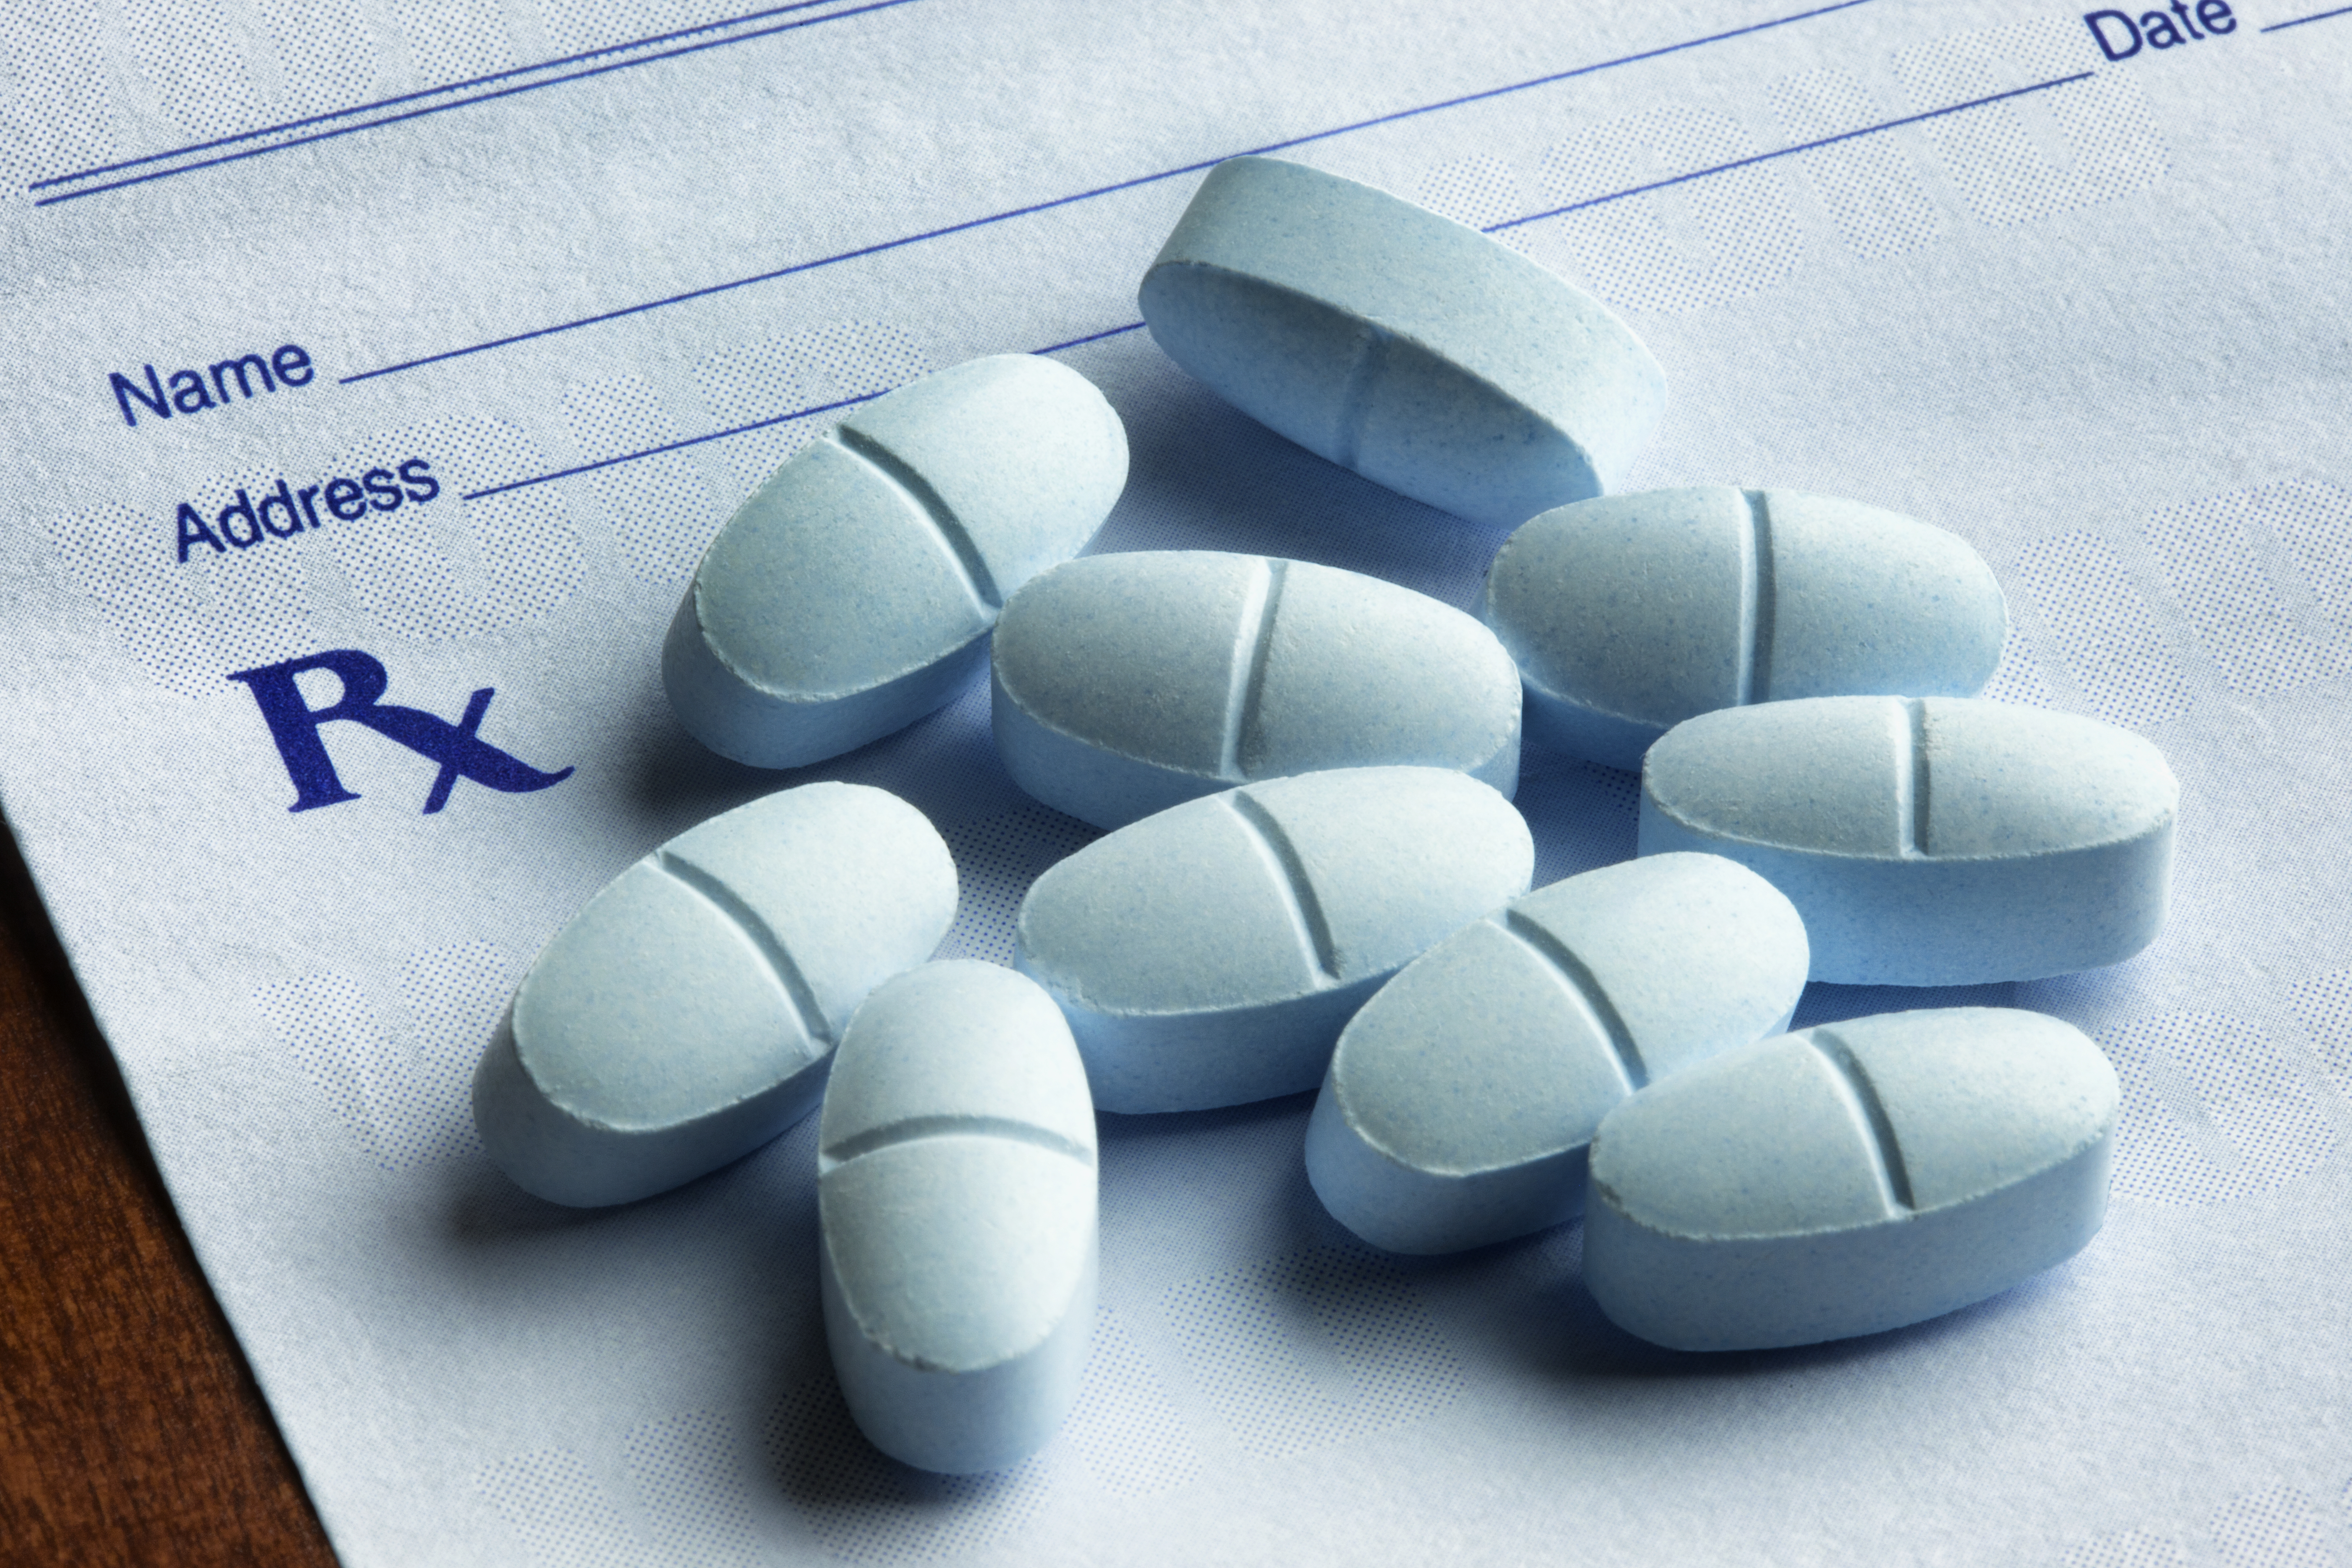 Xanax Detox: What You Need to Know When Getting Help